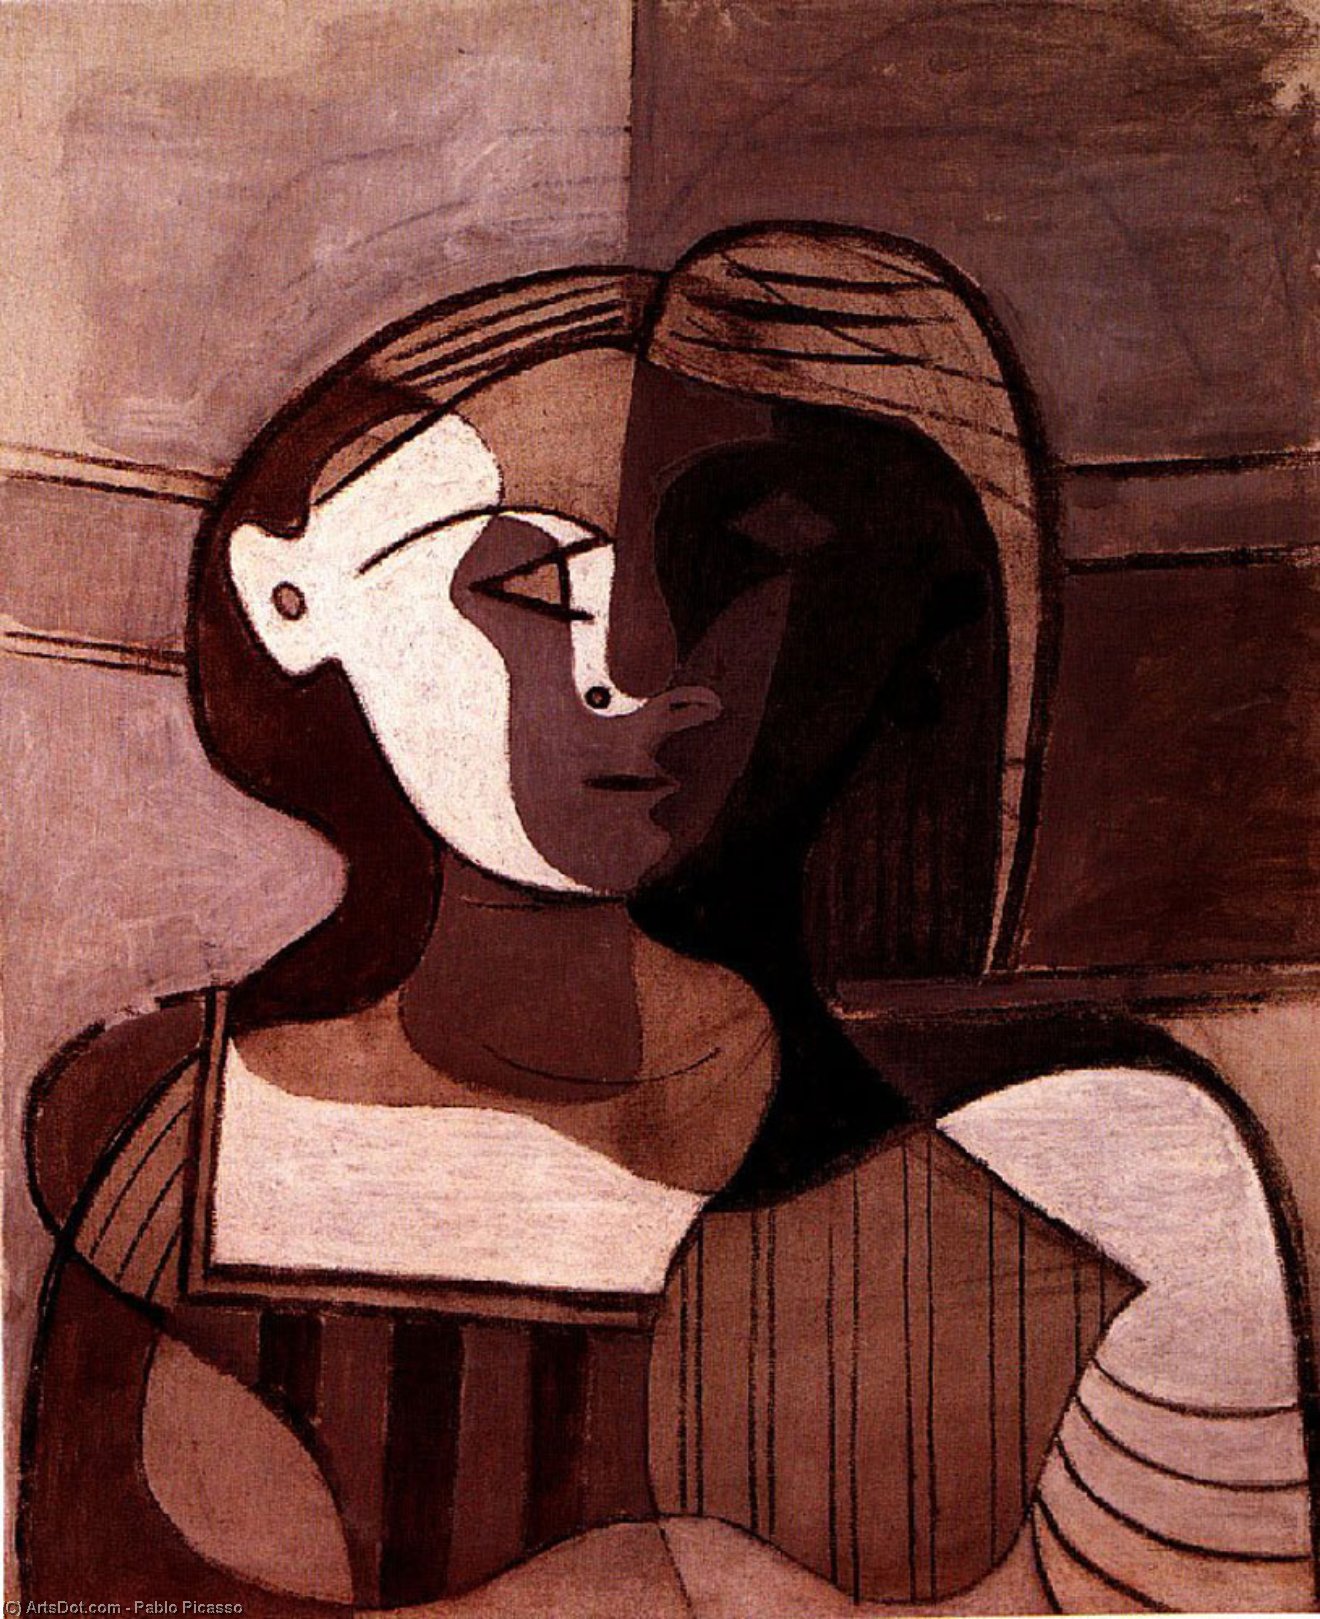 WikiOO.org - Güzel Sanatlar Ansiklopedisi - Resim, Resimler Pablo Picasso - Buste of young woman (Marie-Therese Walter)